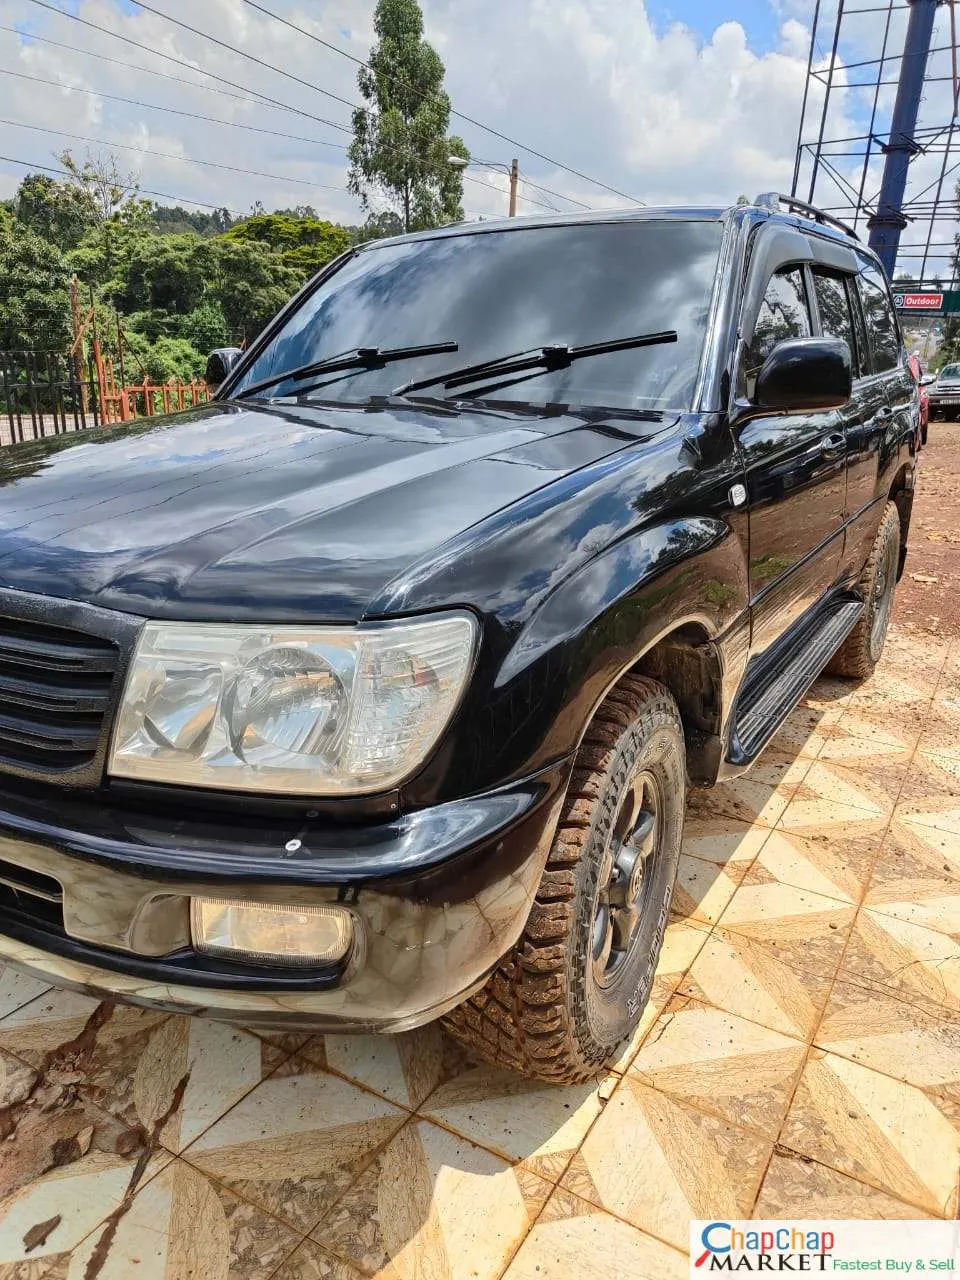 Toyota Land Cruiser AMAZON 4.2 DIESEL 100 SERIES You Pay 30% Deposit Trade in Ok EXCLUSIVE Hire purchase installments local